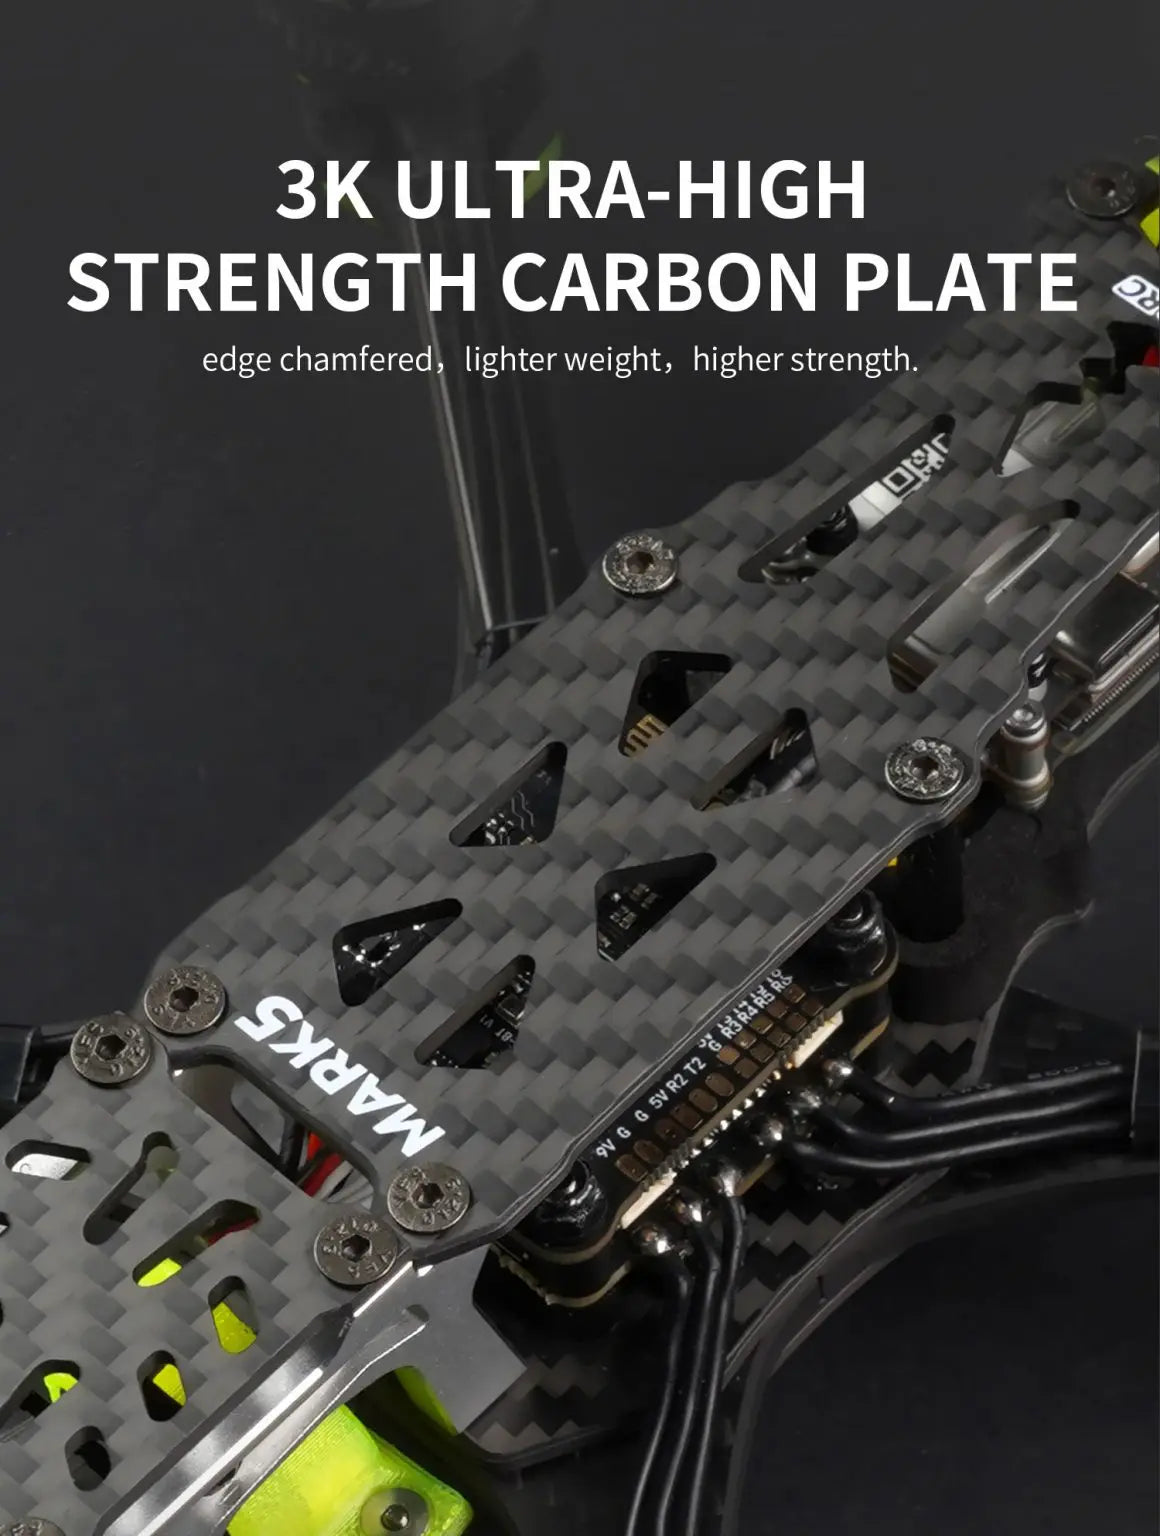 GEPRC MARK5 FPV Drone, 3K ULTRA-HIGH STRENGTH CARBON PLATE cham